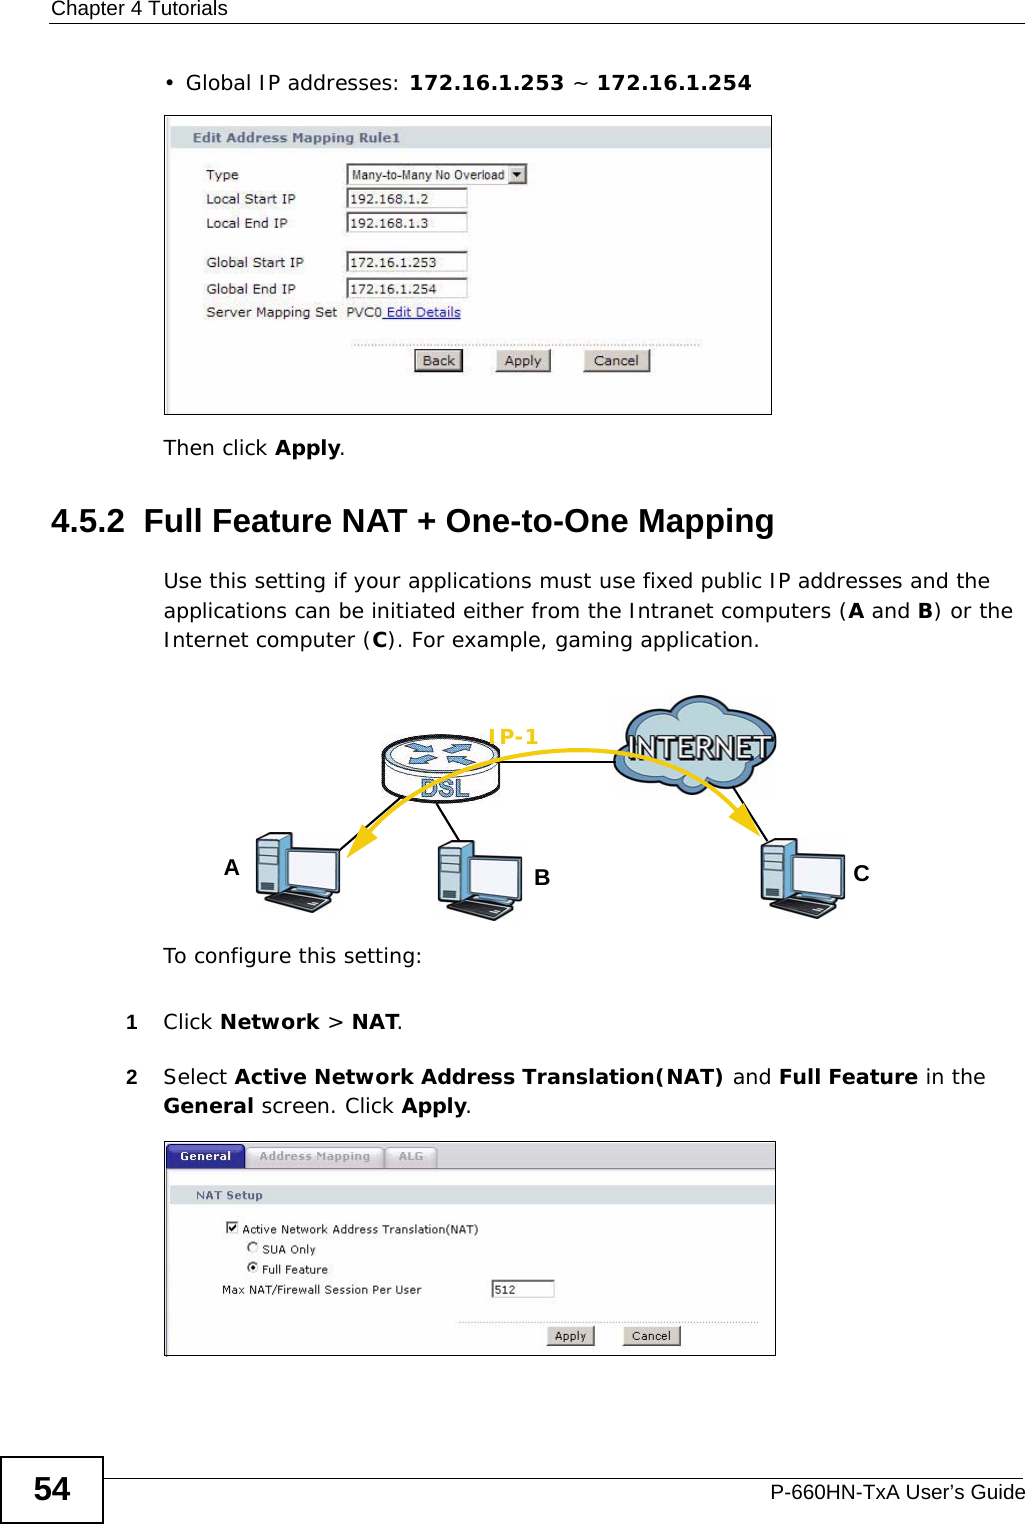 Chapter 4 TutorialsP-660HN-TxA User’s Guide54• Global IP addresses: 172.16.1.253 ~ 172.16.1.254Then click Apply.4.5.2  Full Feature NAT + One-to-One MappingUse this setting if your applications must use fixed public IP addresses and the applications can be initiated either from the Intranet computers (A and B) or the Internet computer (C). For example, gaming application.To configure this setting:1Click Network &gt; NAT.2Select Active Network Address Translation(NAT) and Full Feature in the General screen. Click Apply.ABIP-1C